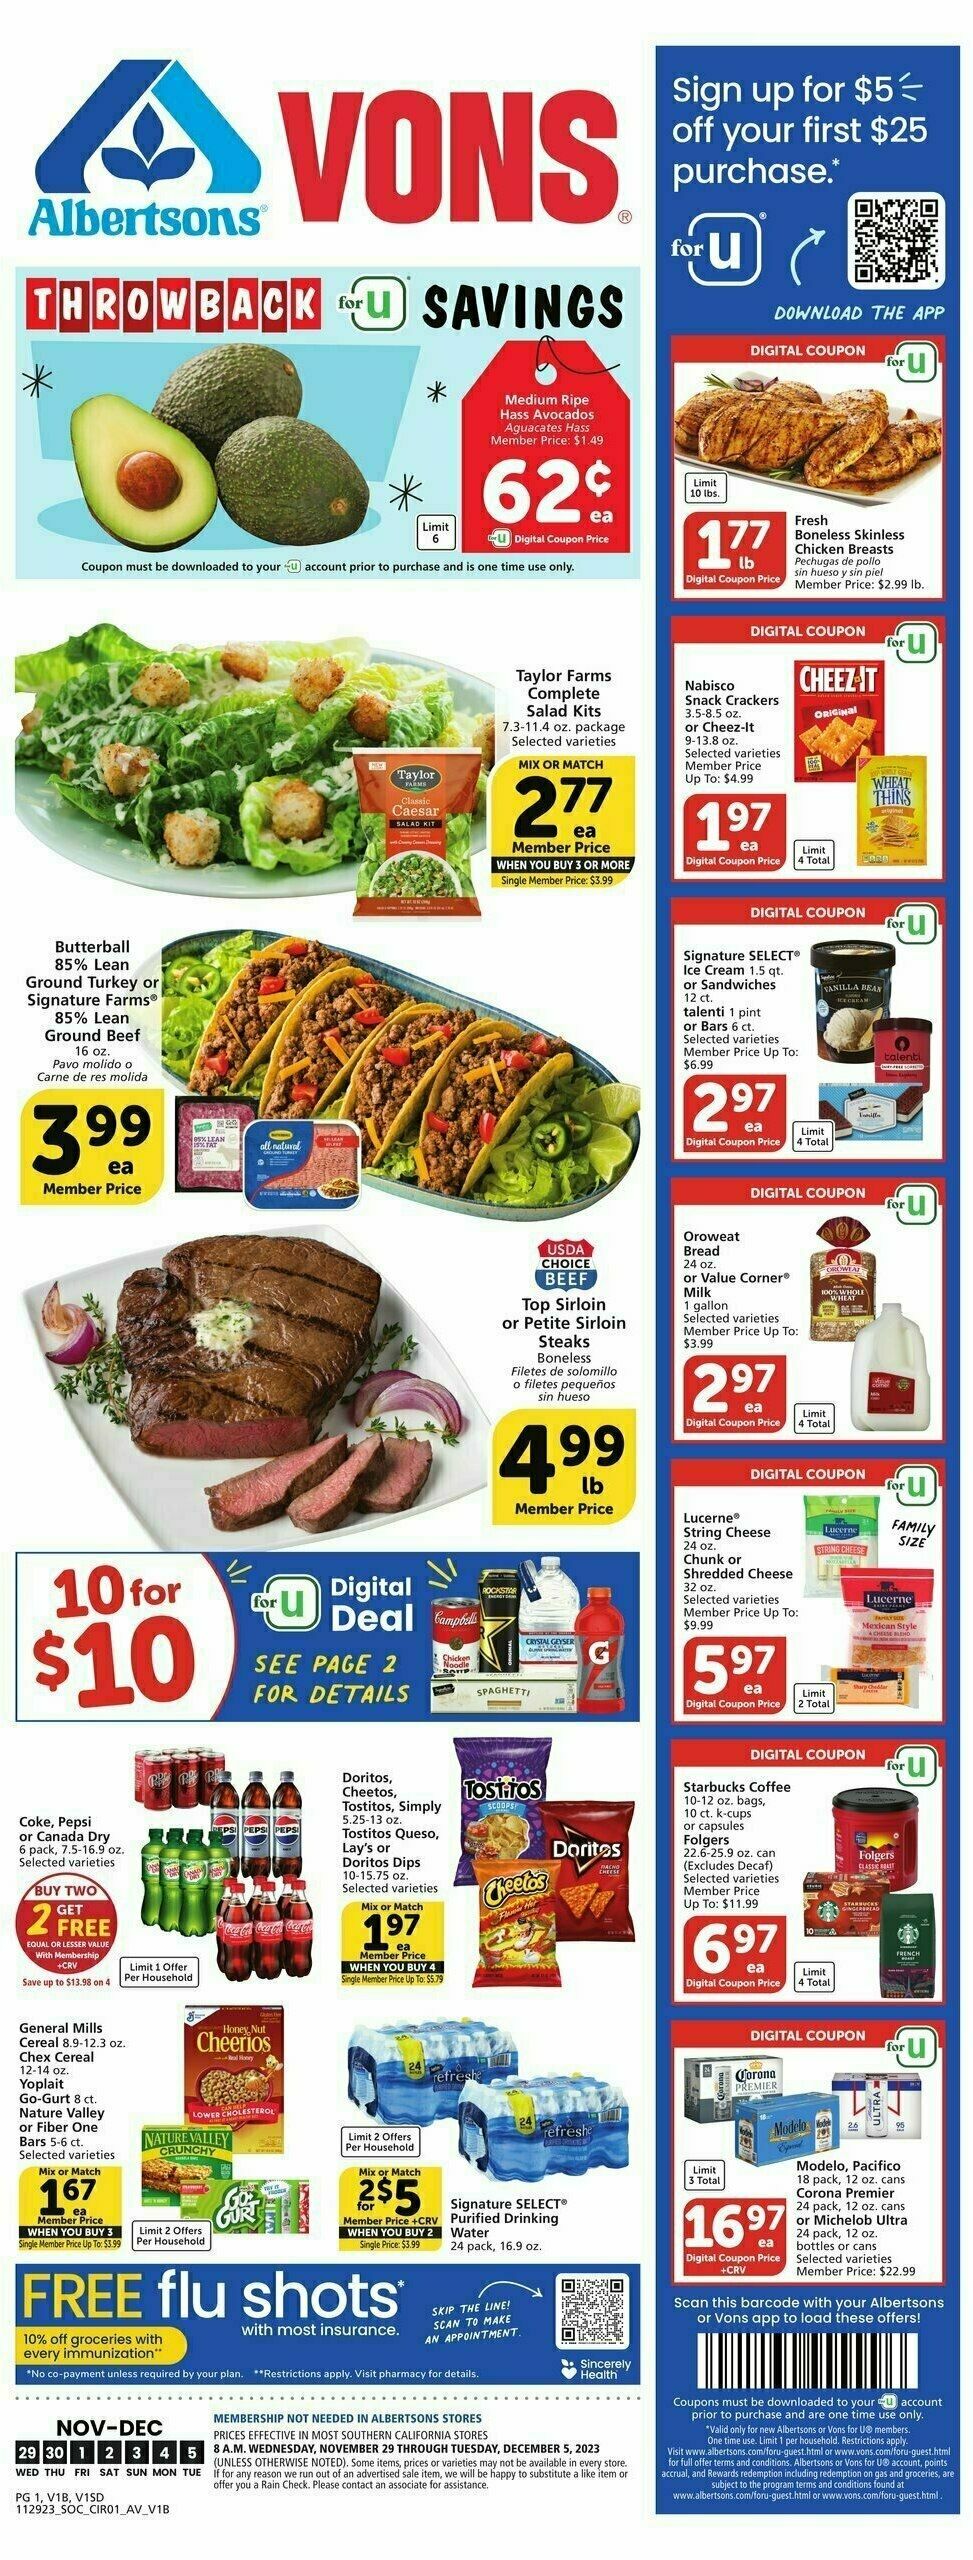 Vons Weekly Ad from November 29